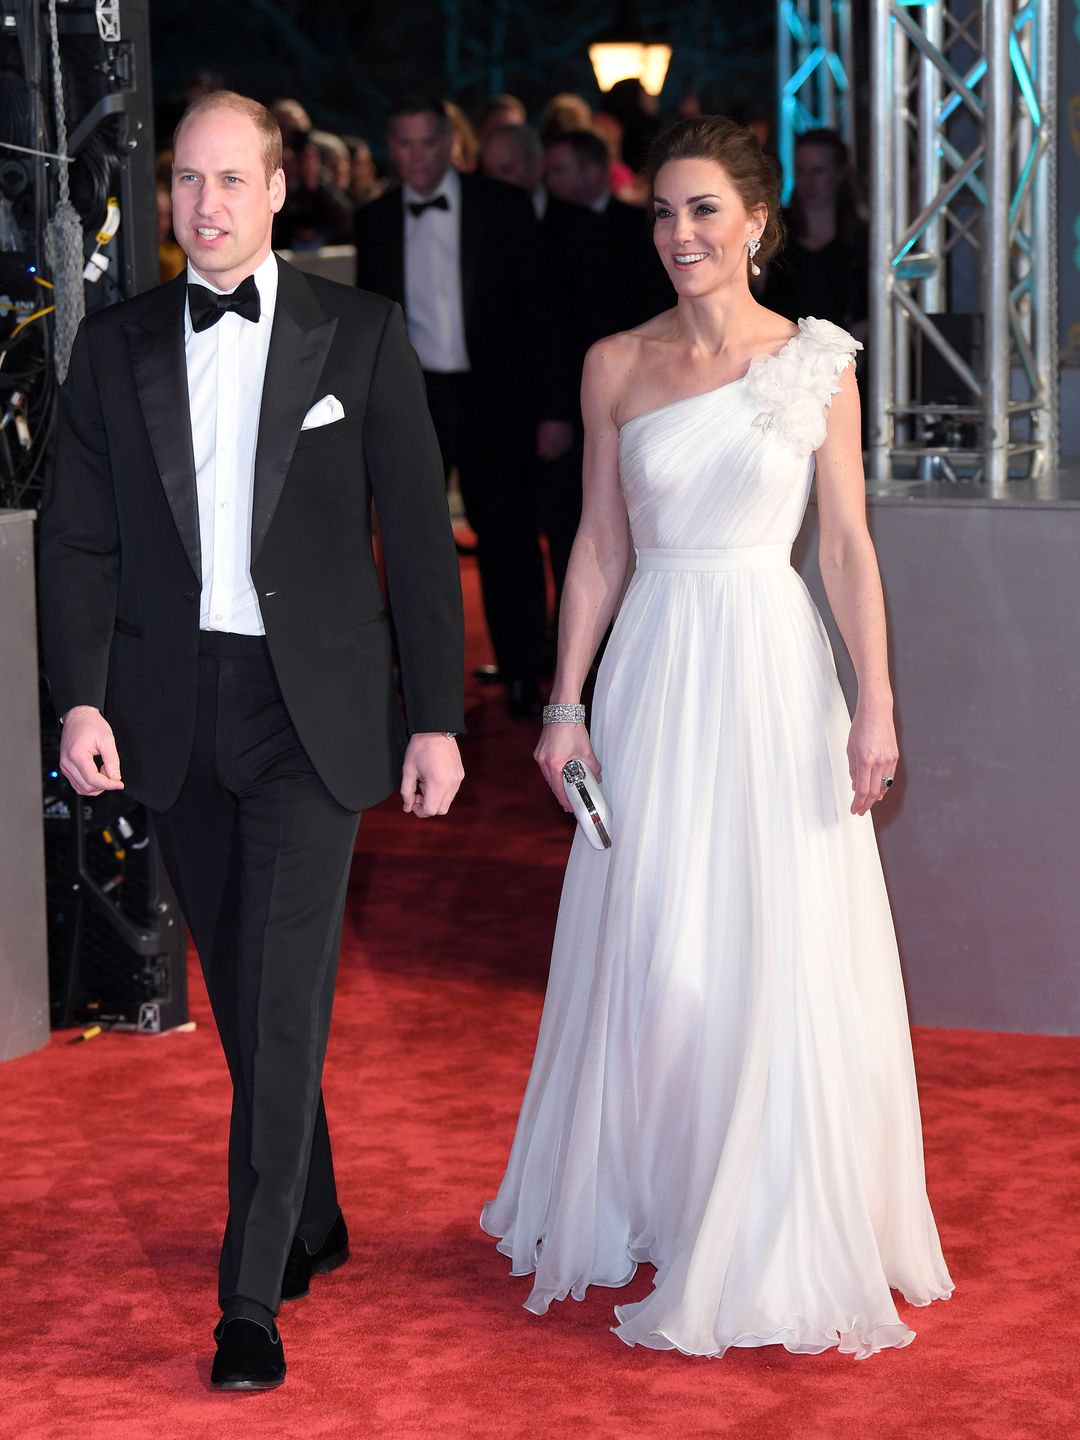 Prince William and Kate attend the EE British Academy Film Awards at Royal Albert Hall on February 10, 2019